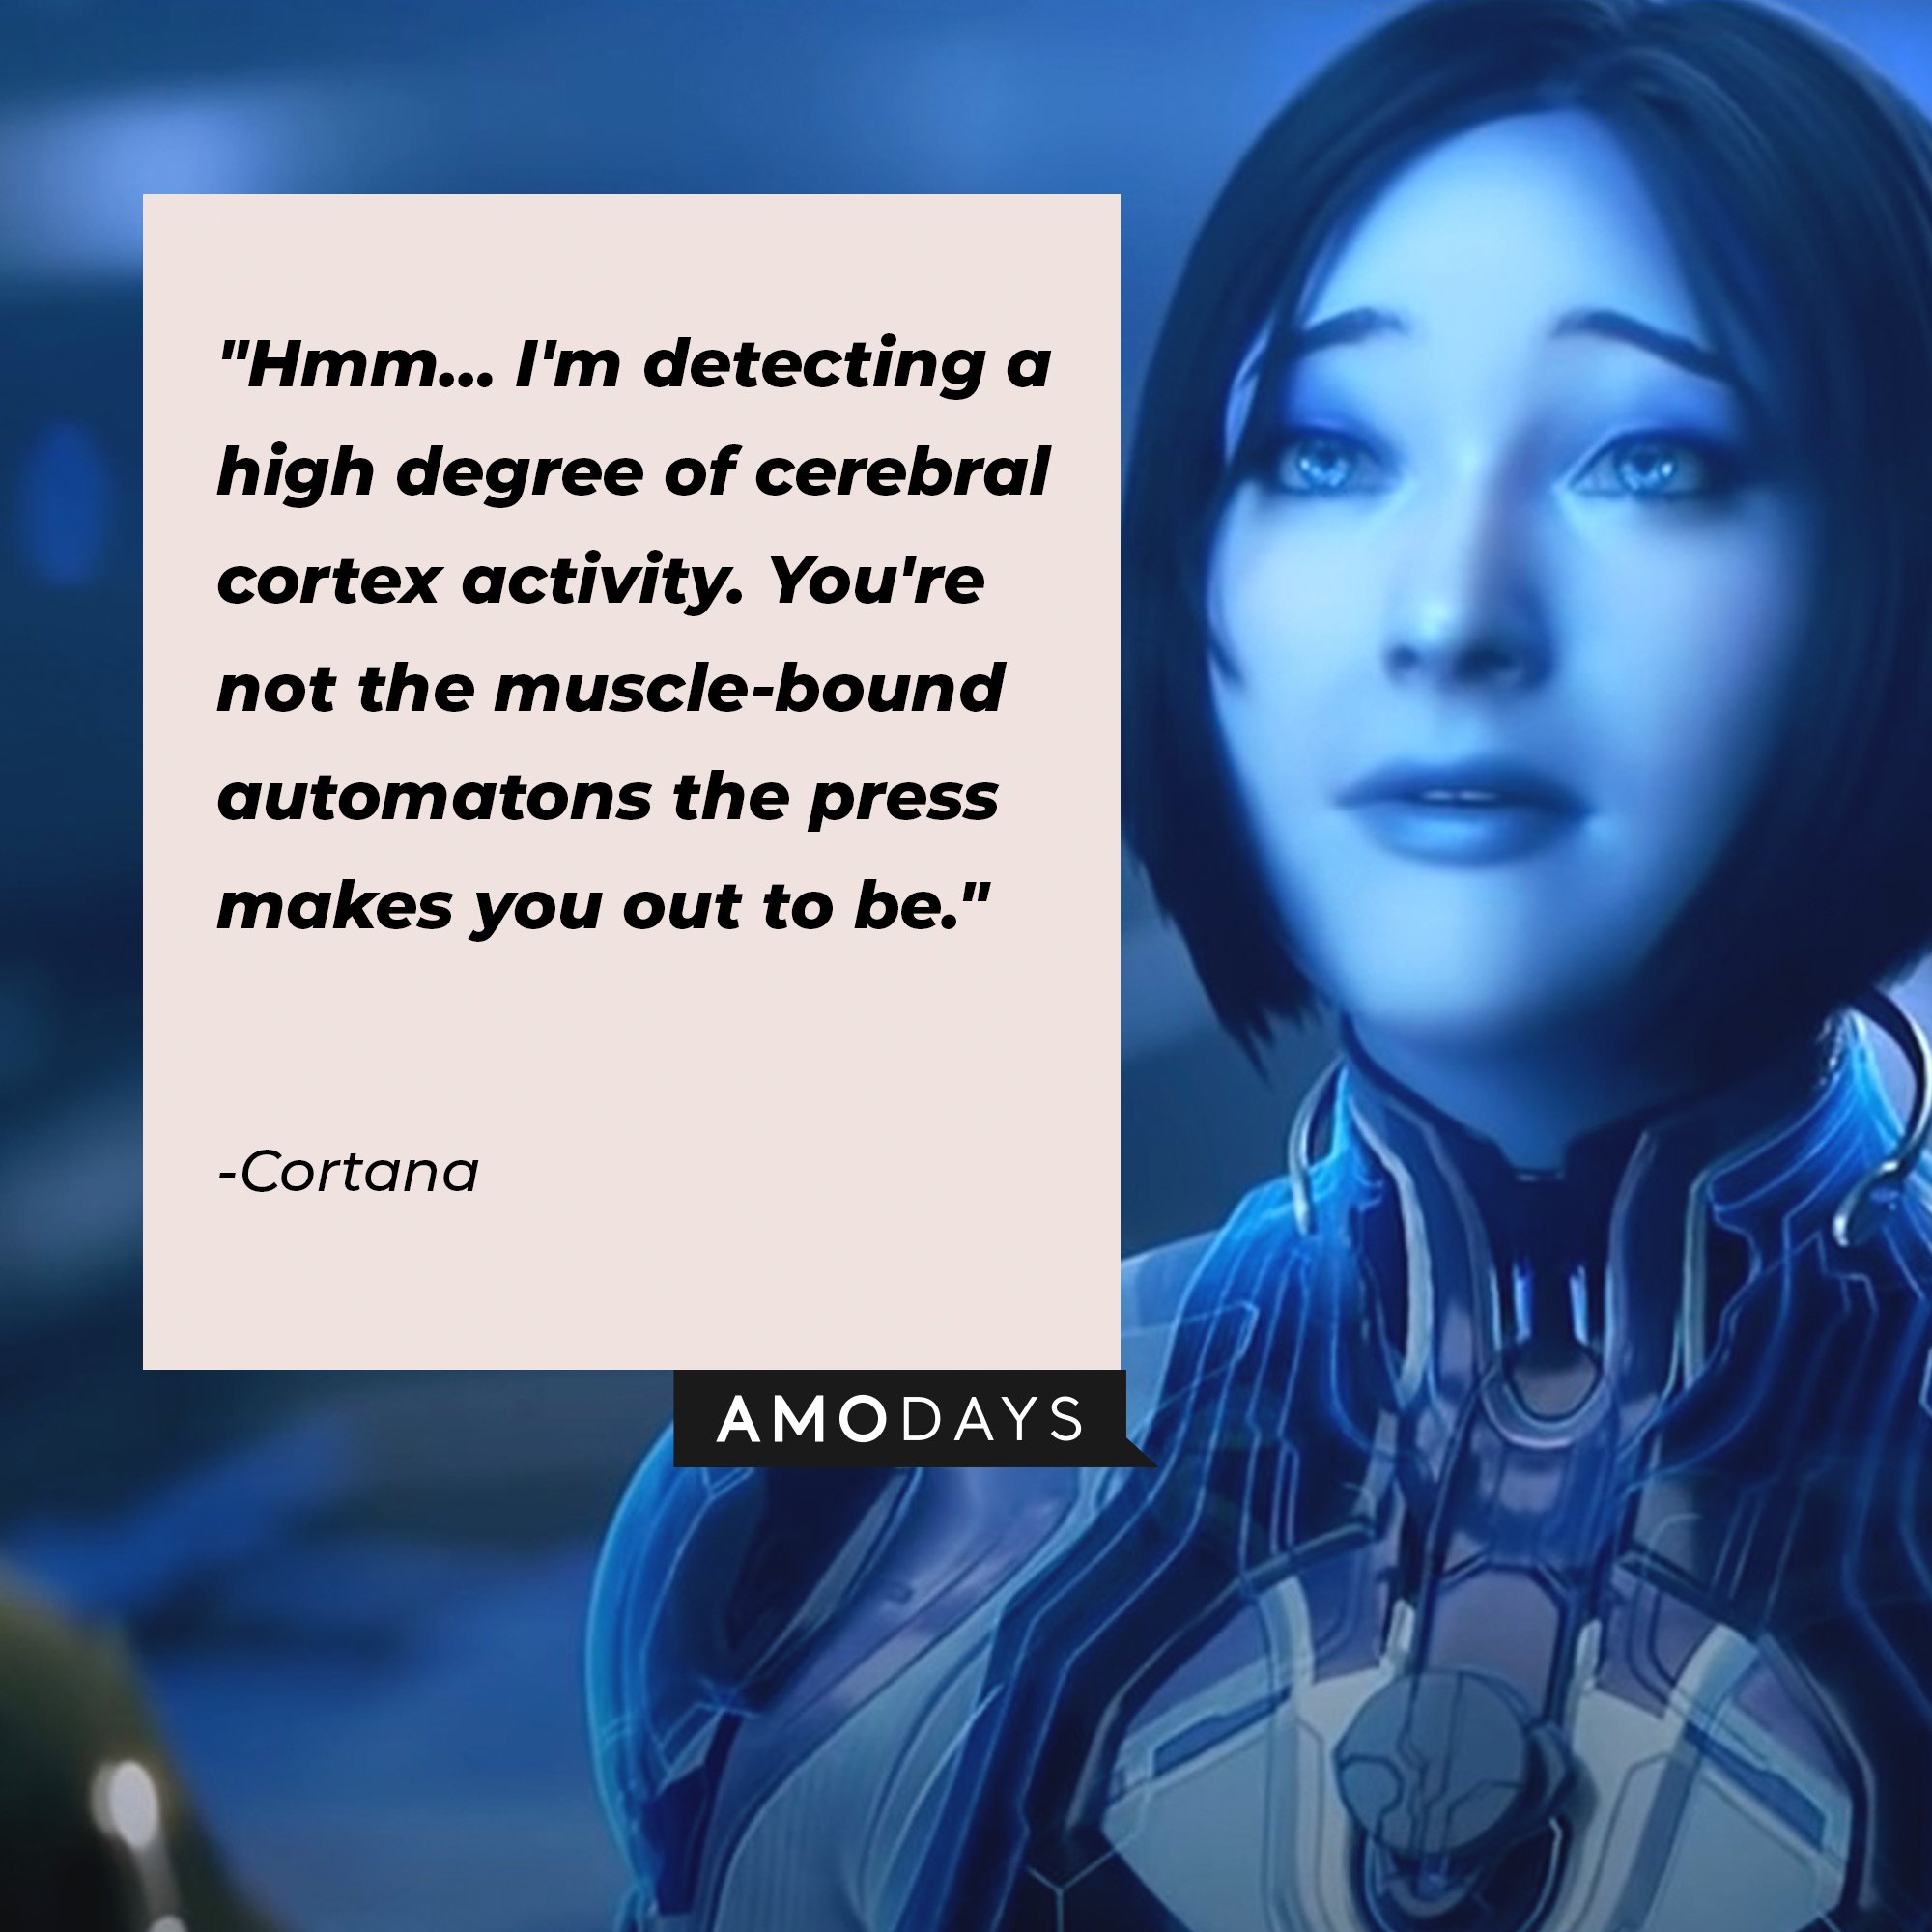 Cortana's quote: "Hmm… I'm detecting a high degree of cerebral cortex activity. You're not the muscle-bound automatons the press makes you out to be." | Image: AmoDays